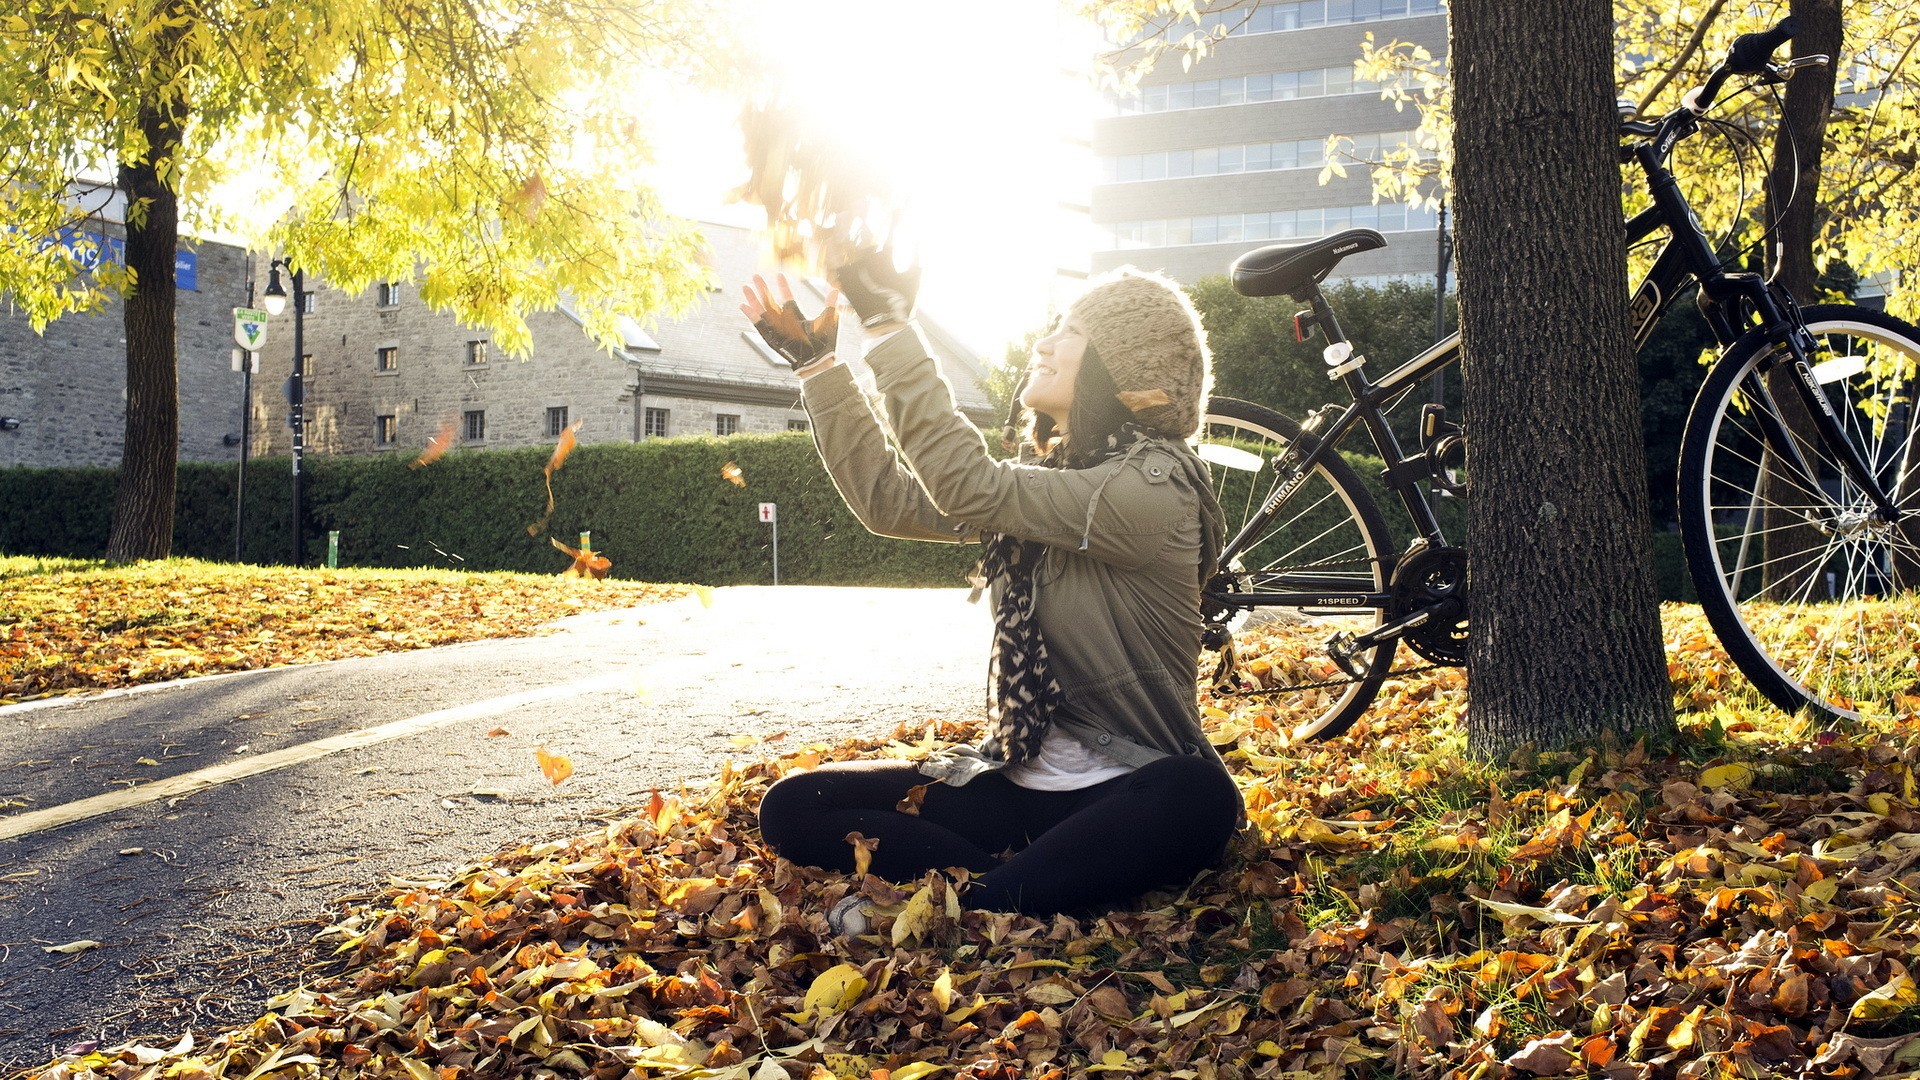 People 1920x1080 fall trees bicycle road sitting sunlight women outdoors hat women with bicycles fallen leaves arms up looking up wool cap women